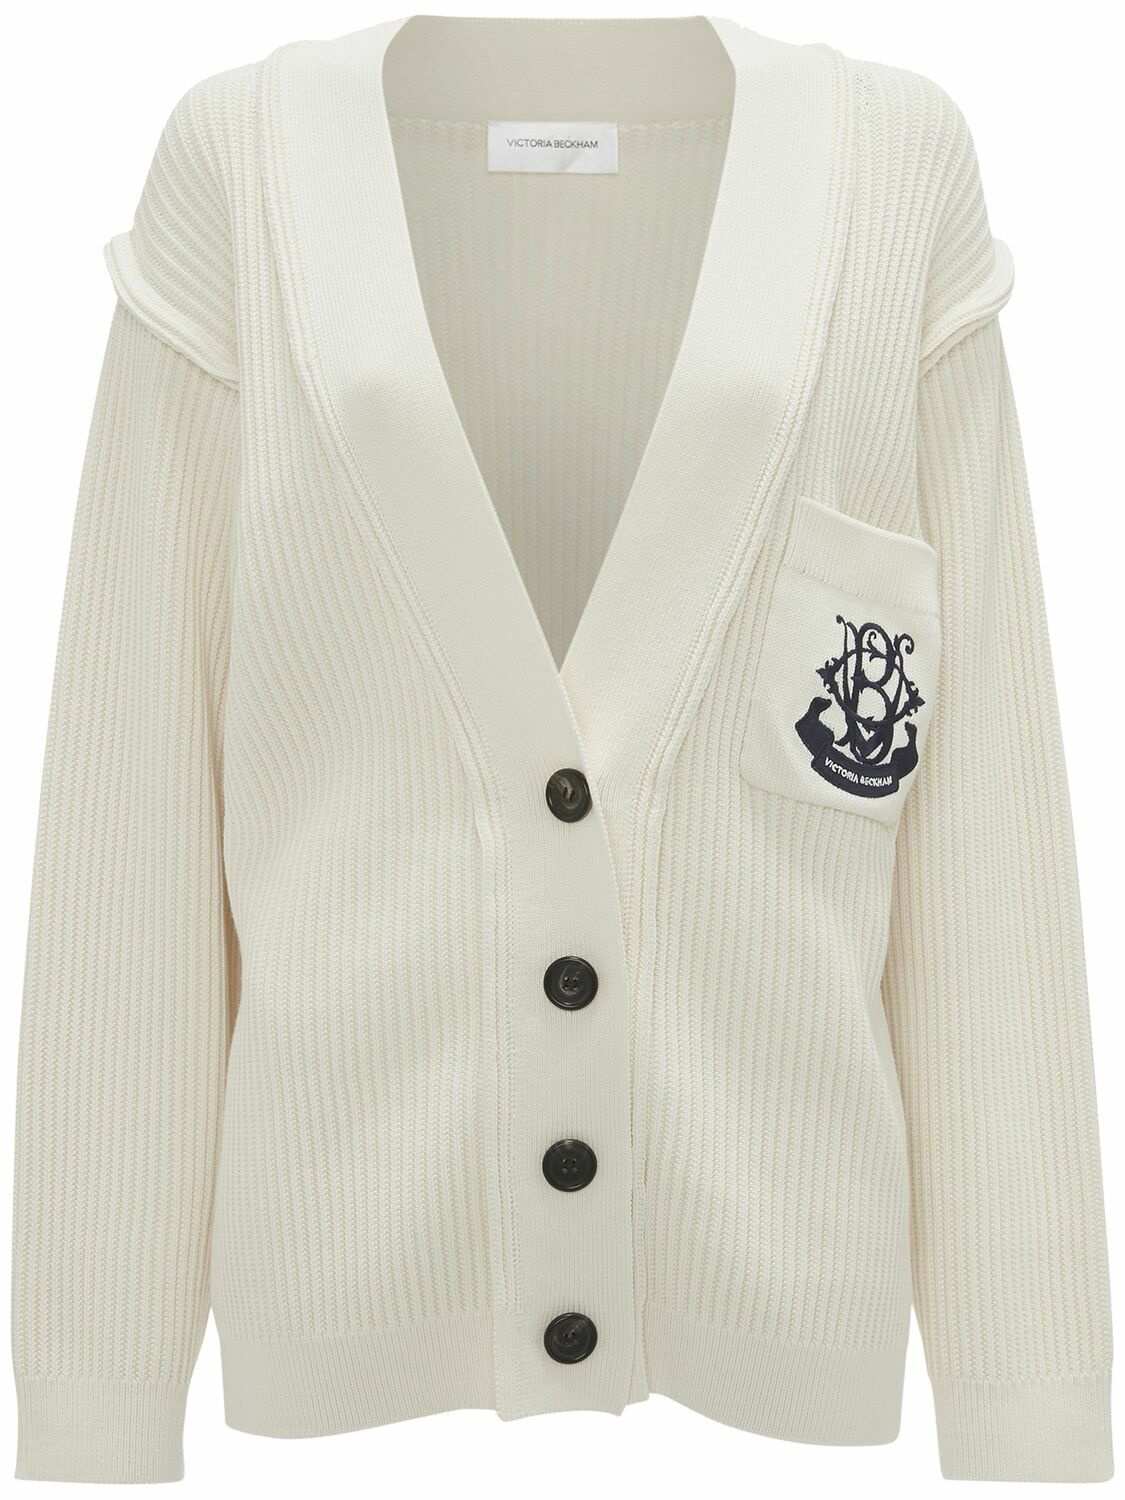 VICTORIA BECKHAM - Relaxed Fit Cotton & Silk Knit Cardigan